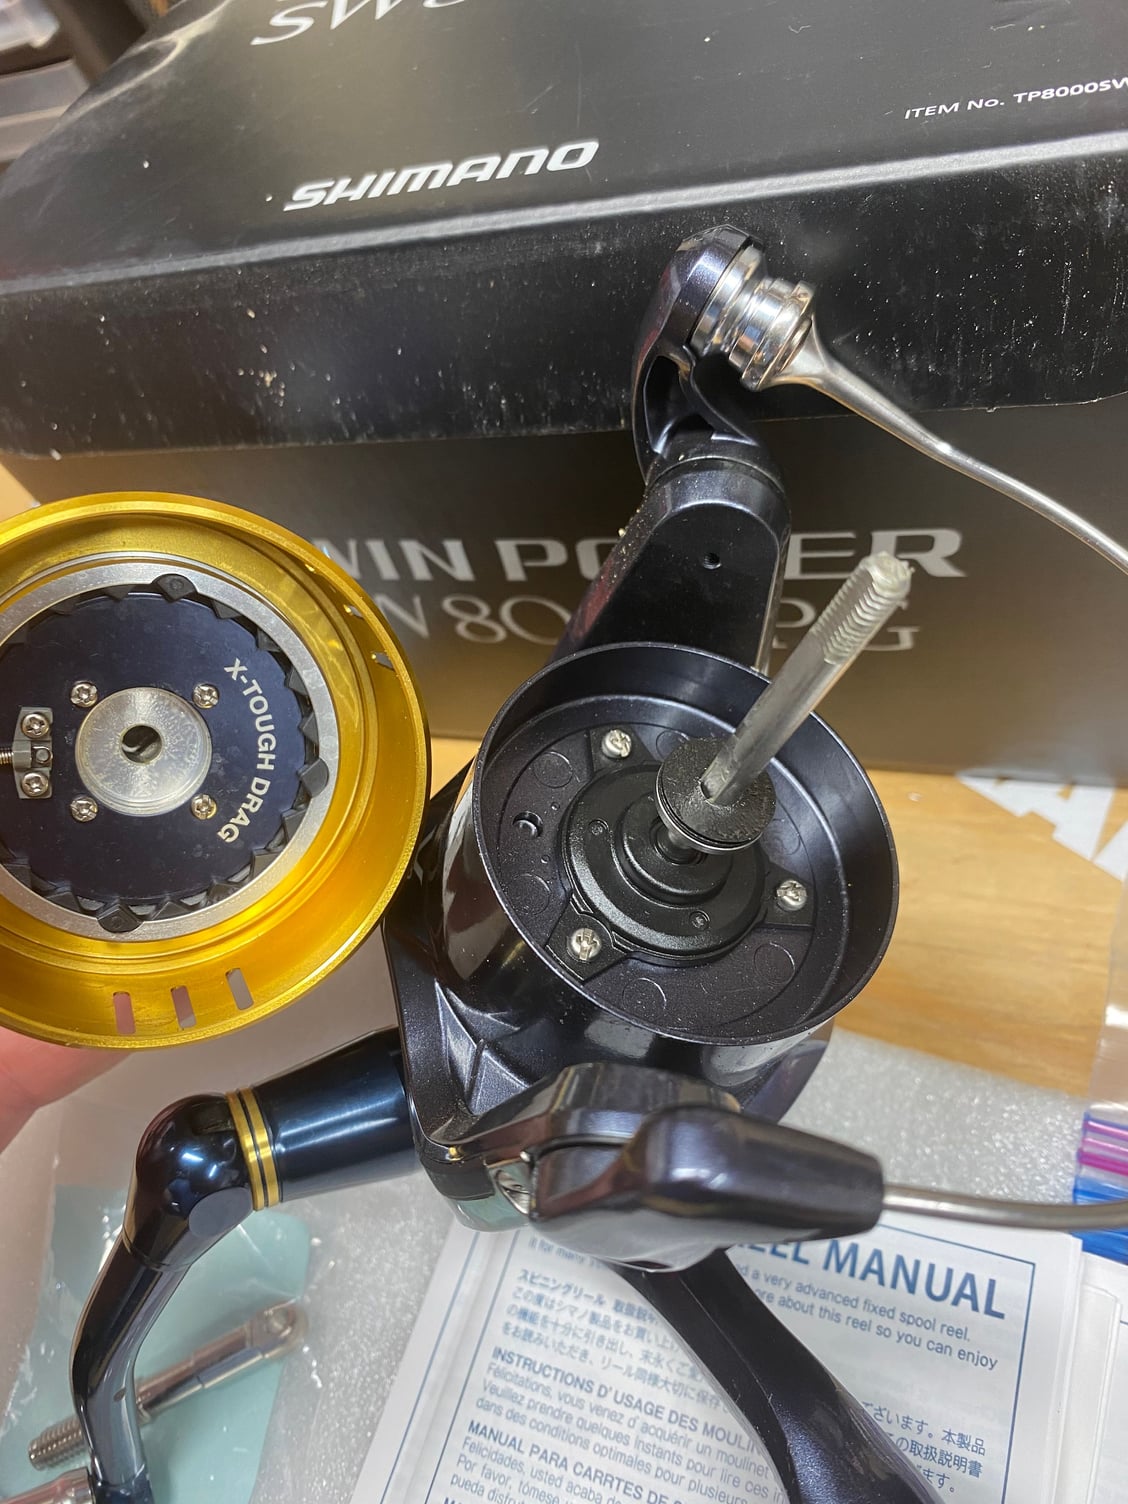 2 shimano twinpower 8000 for sale - The Hull Truth - Boating and